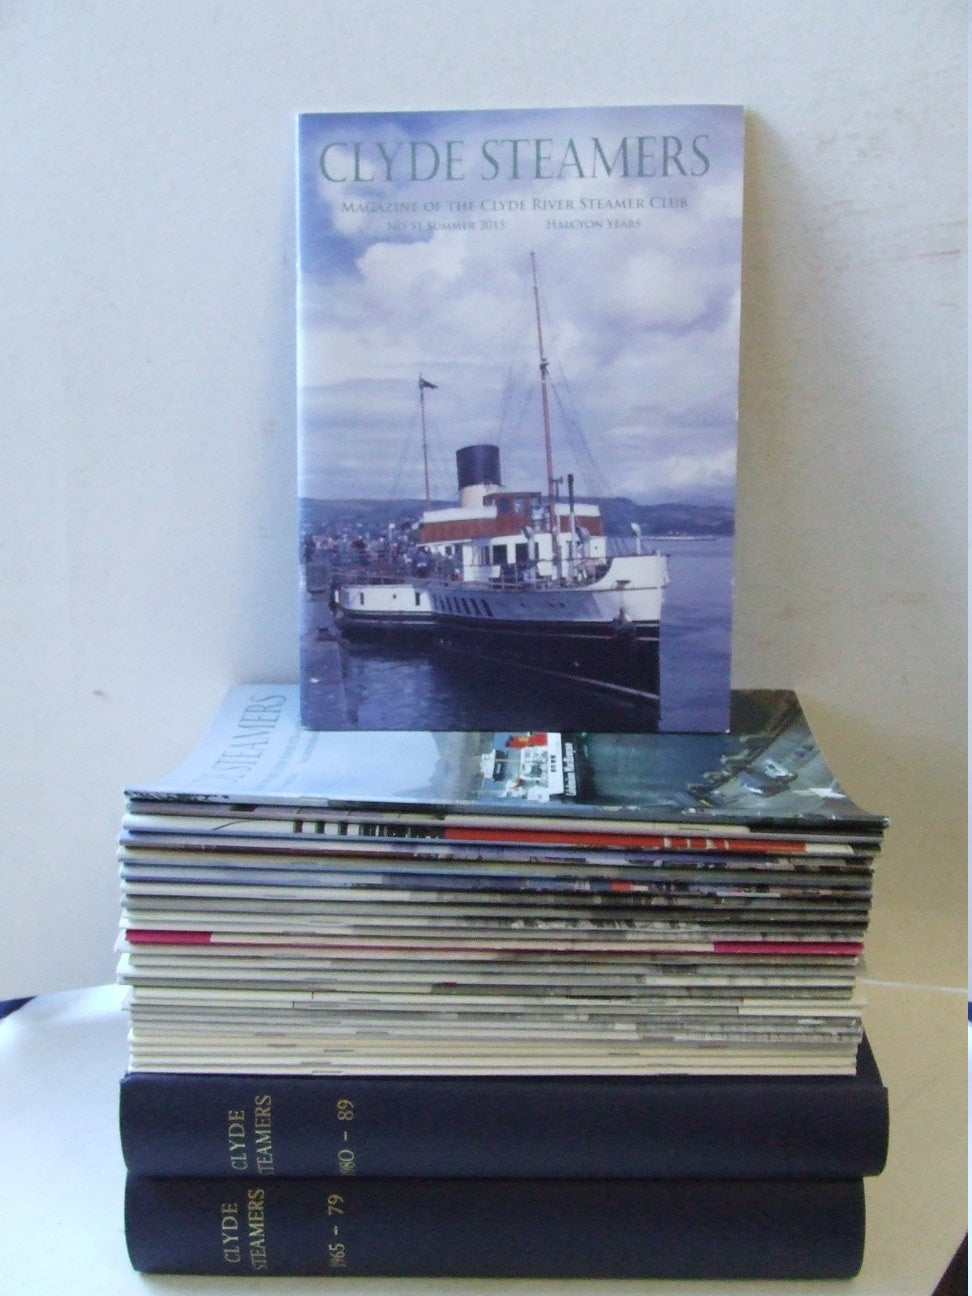 'Clyde Steamers', magazine of the Clyde River Steamer Club